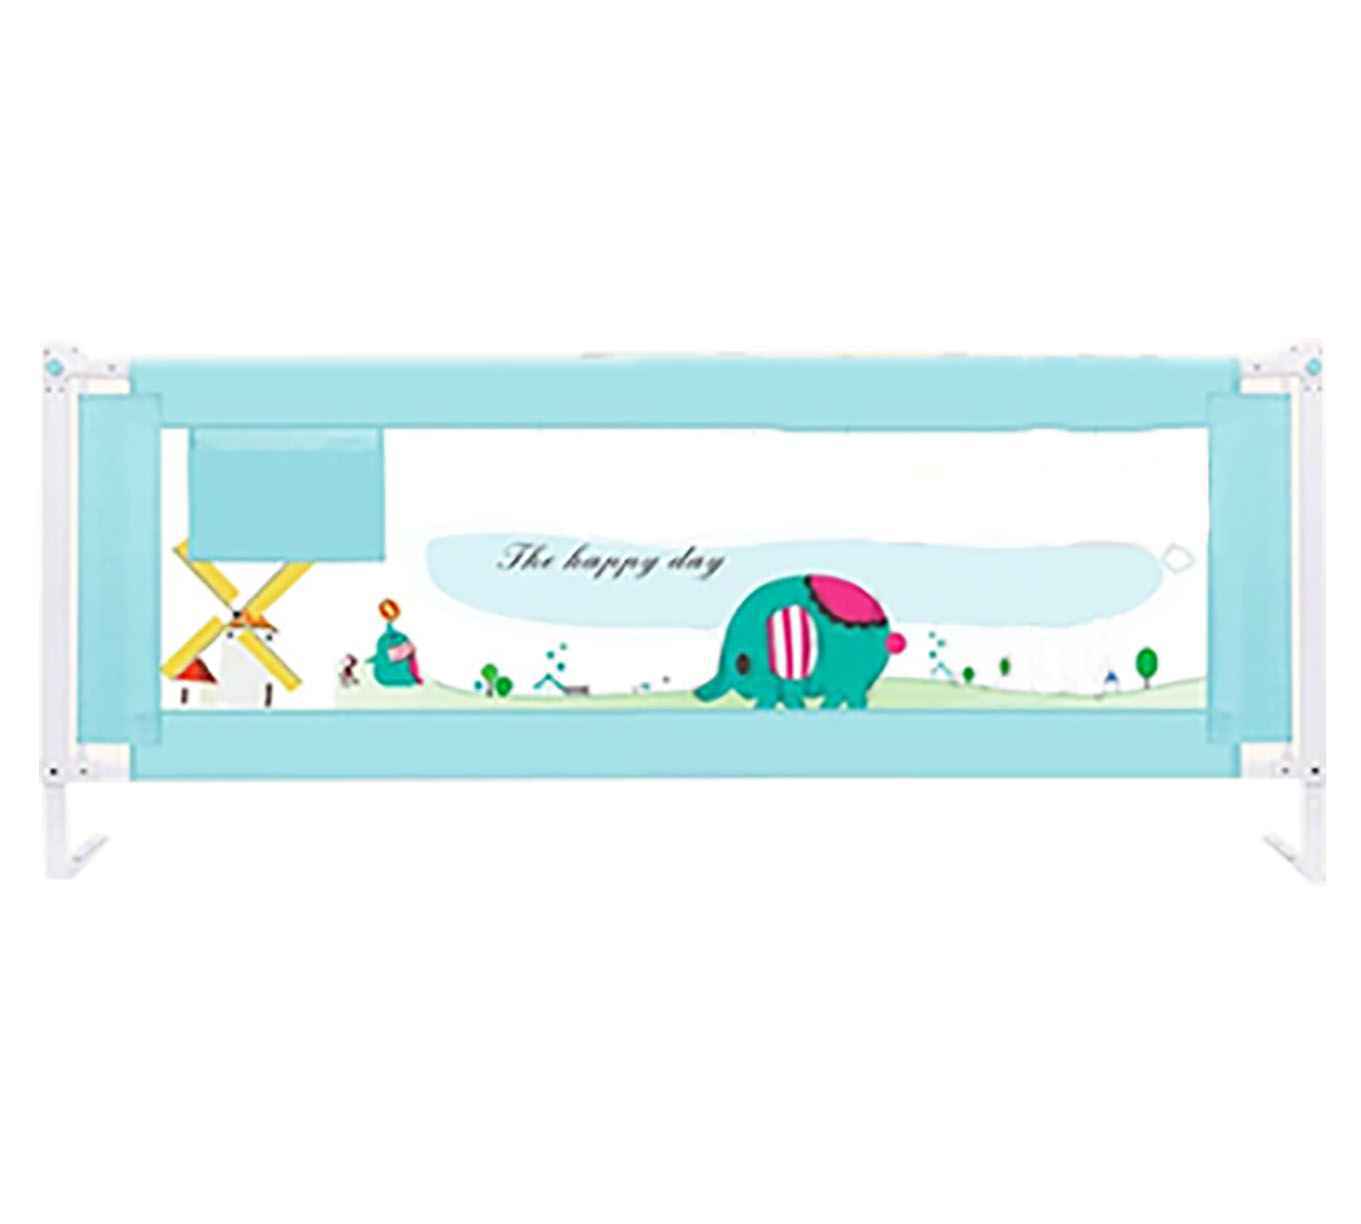 Bedrail Height 85cm The Happy Day 200cm - Tosca